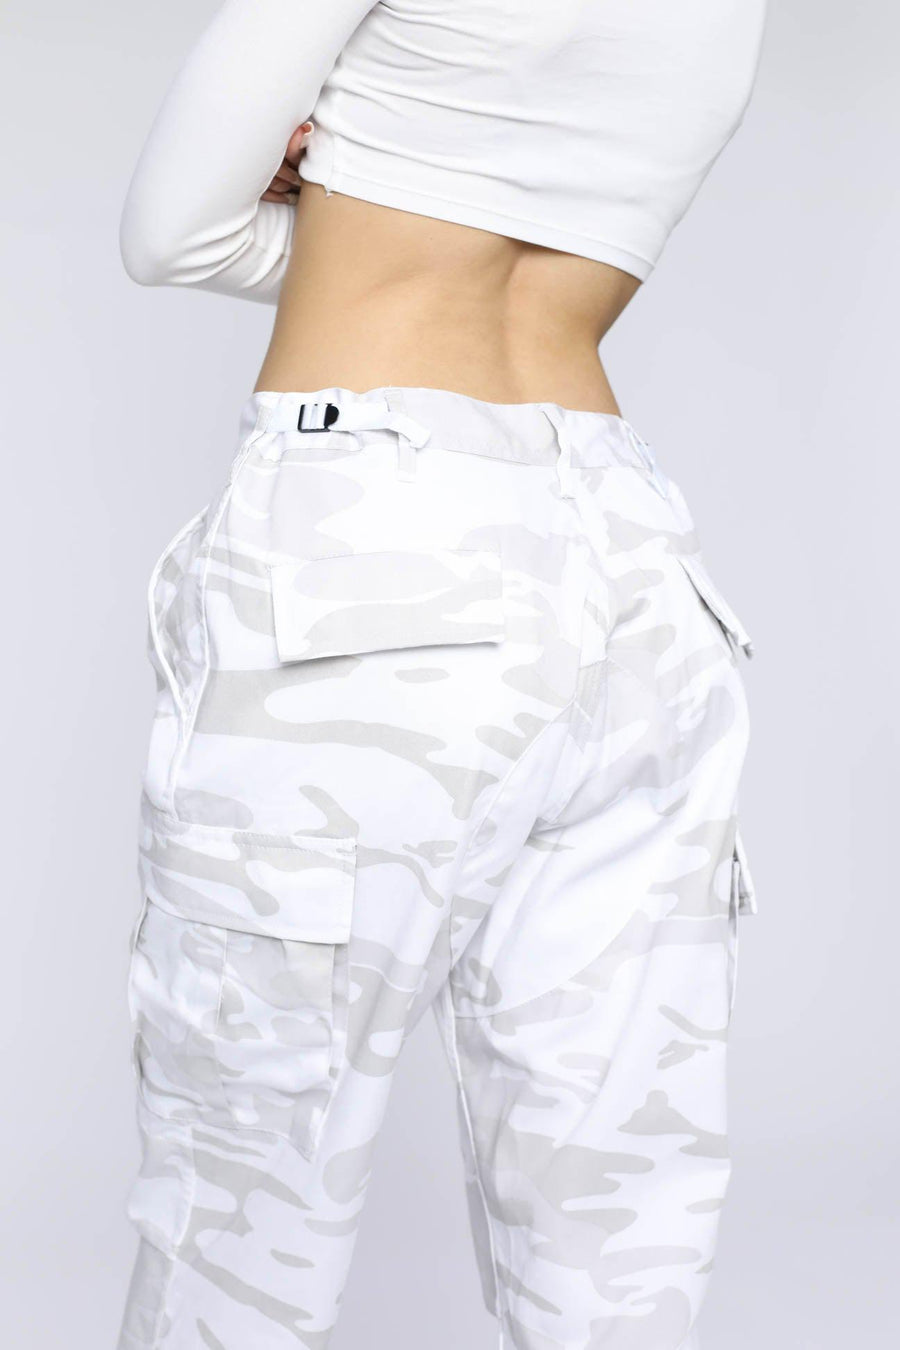 Army Pants BDU Camou Russian White  DCs Special  Hardcore   Streetwearshop